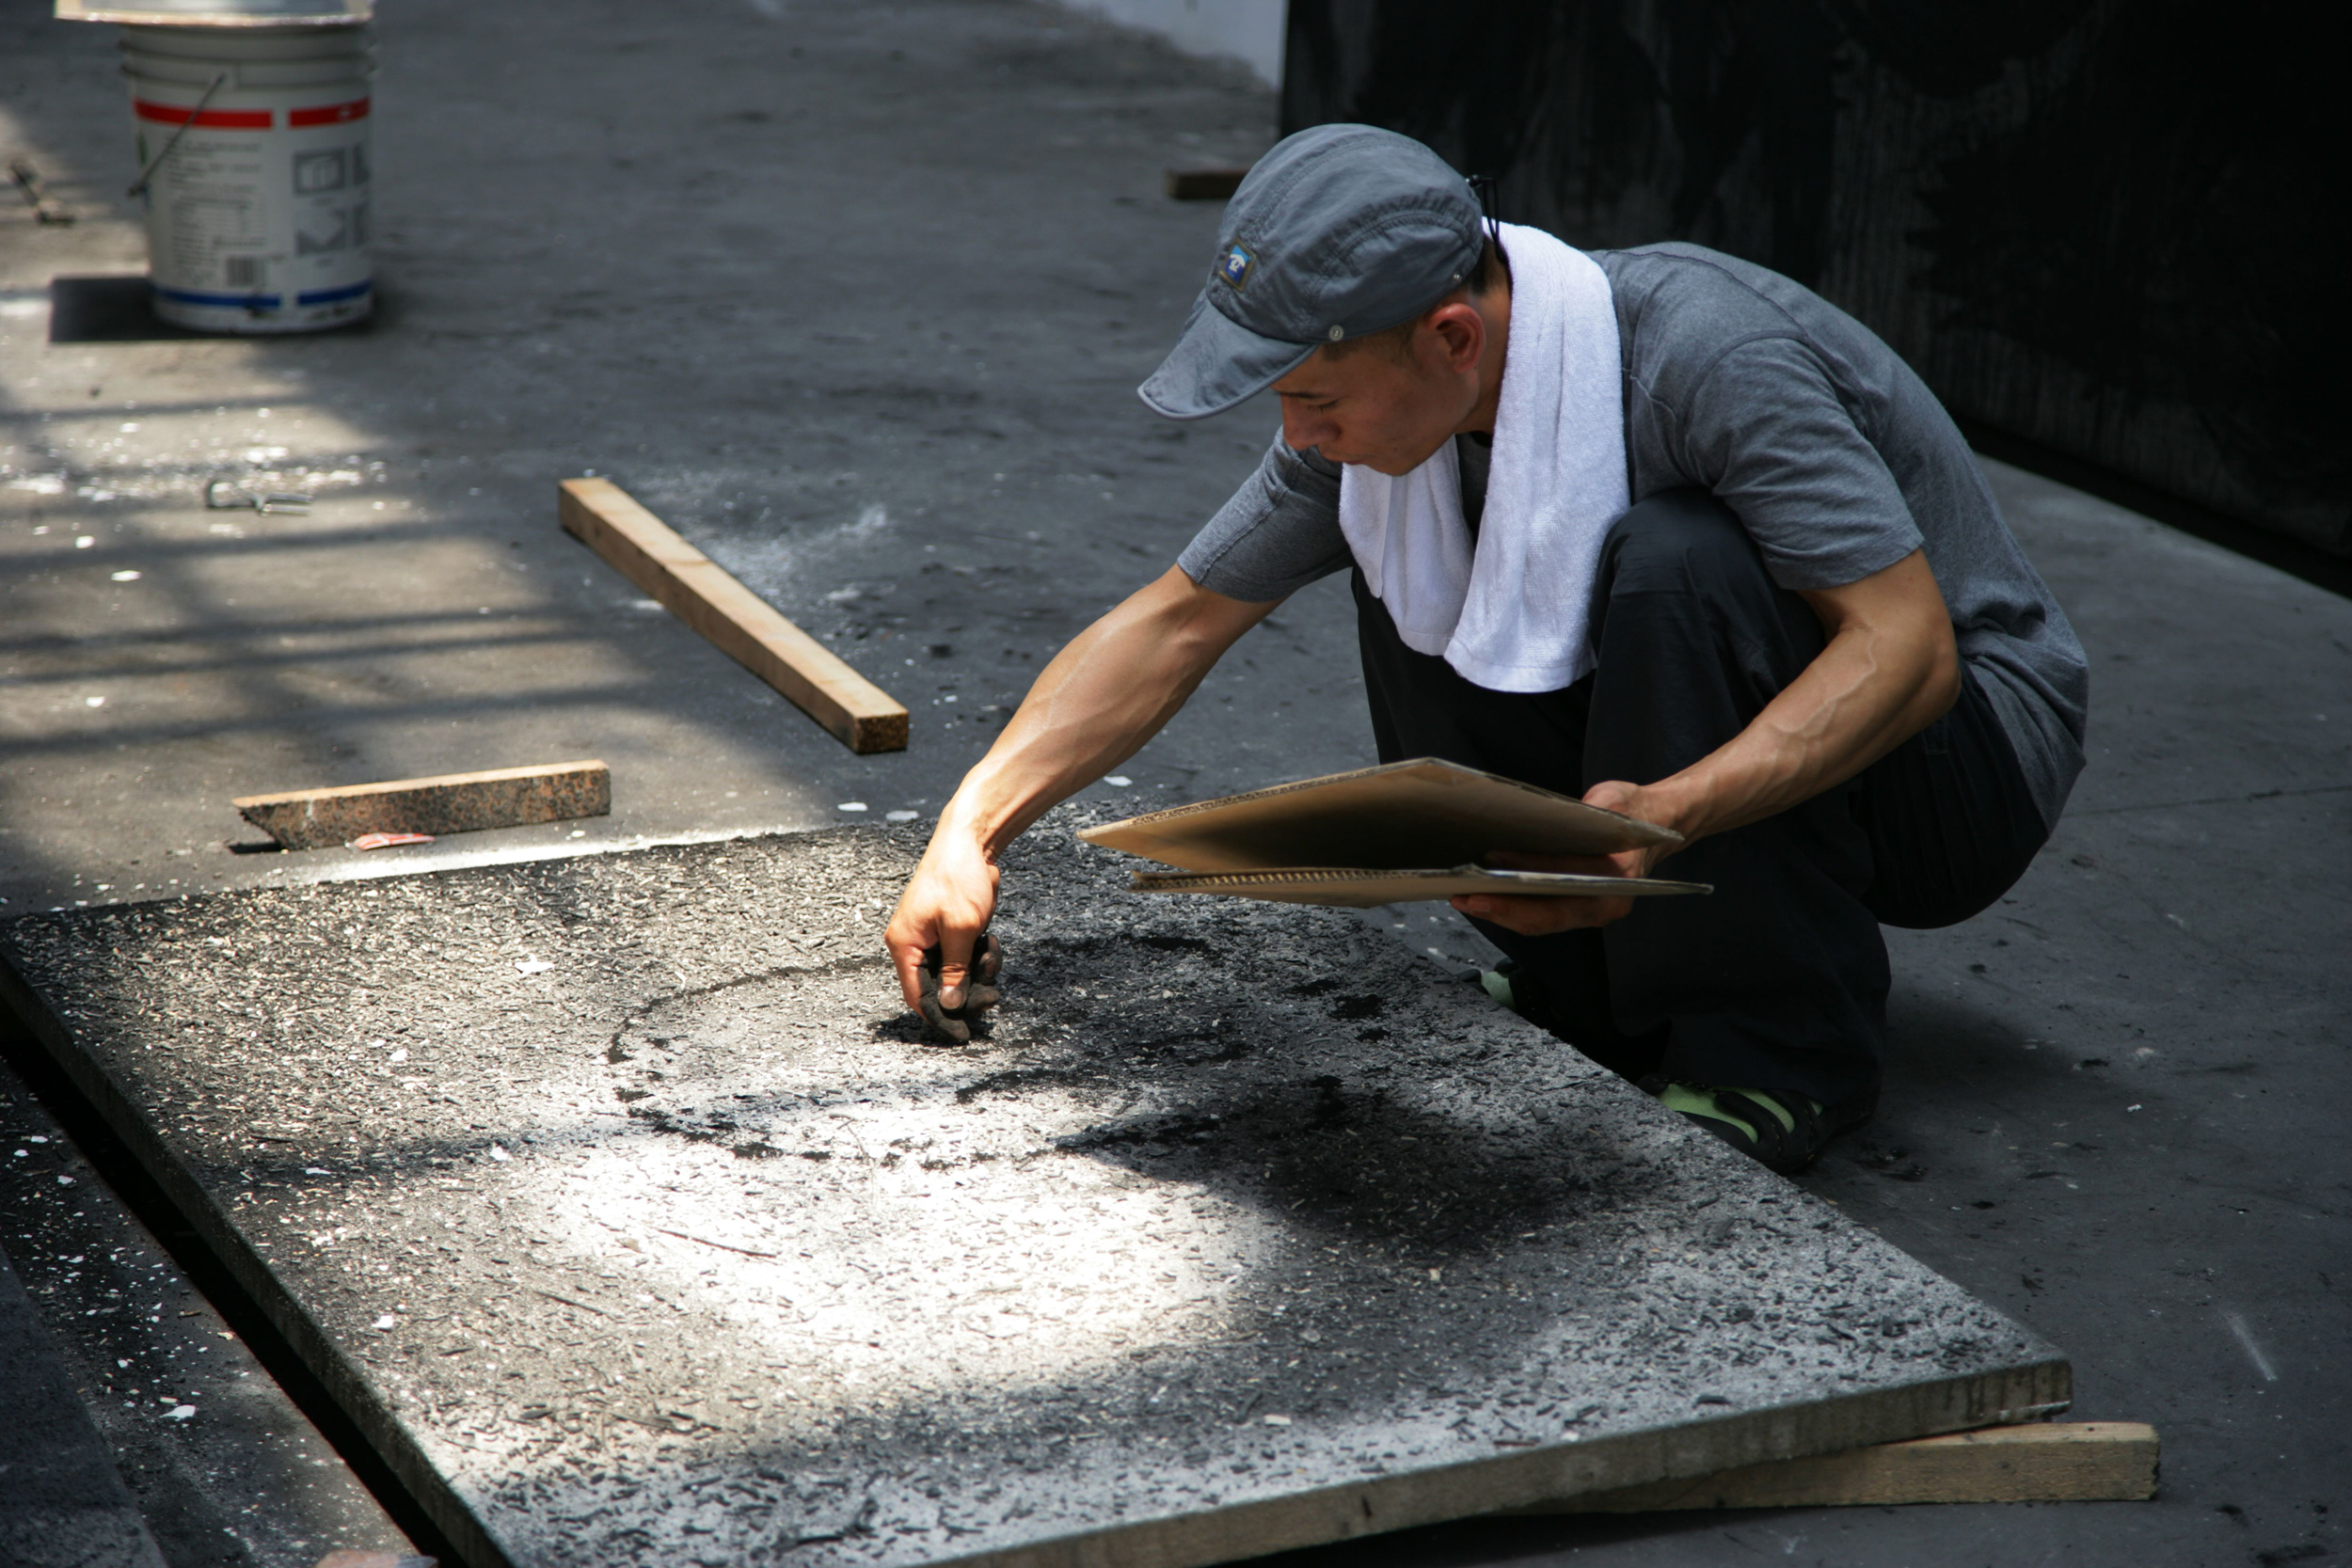 Zhang Huan applying ash to a painting. Photo courtesy of the artist and Pace Gallery.